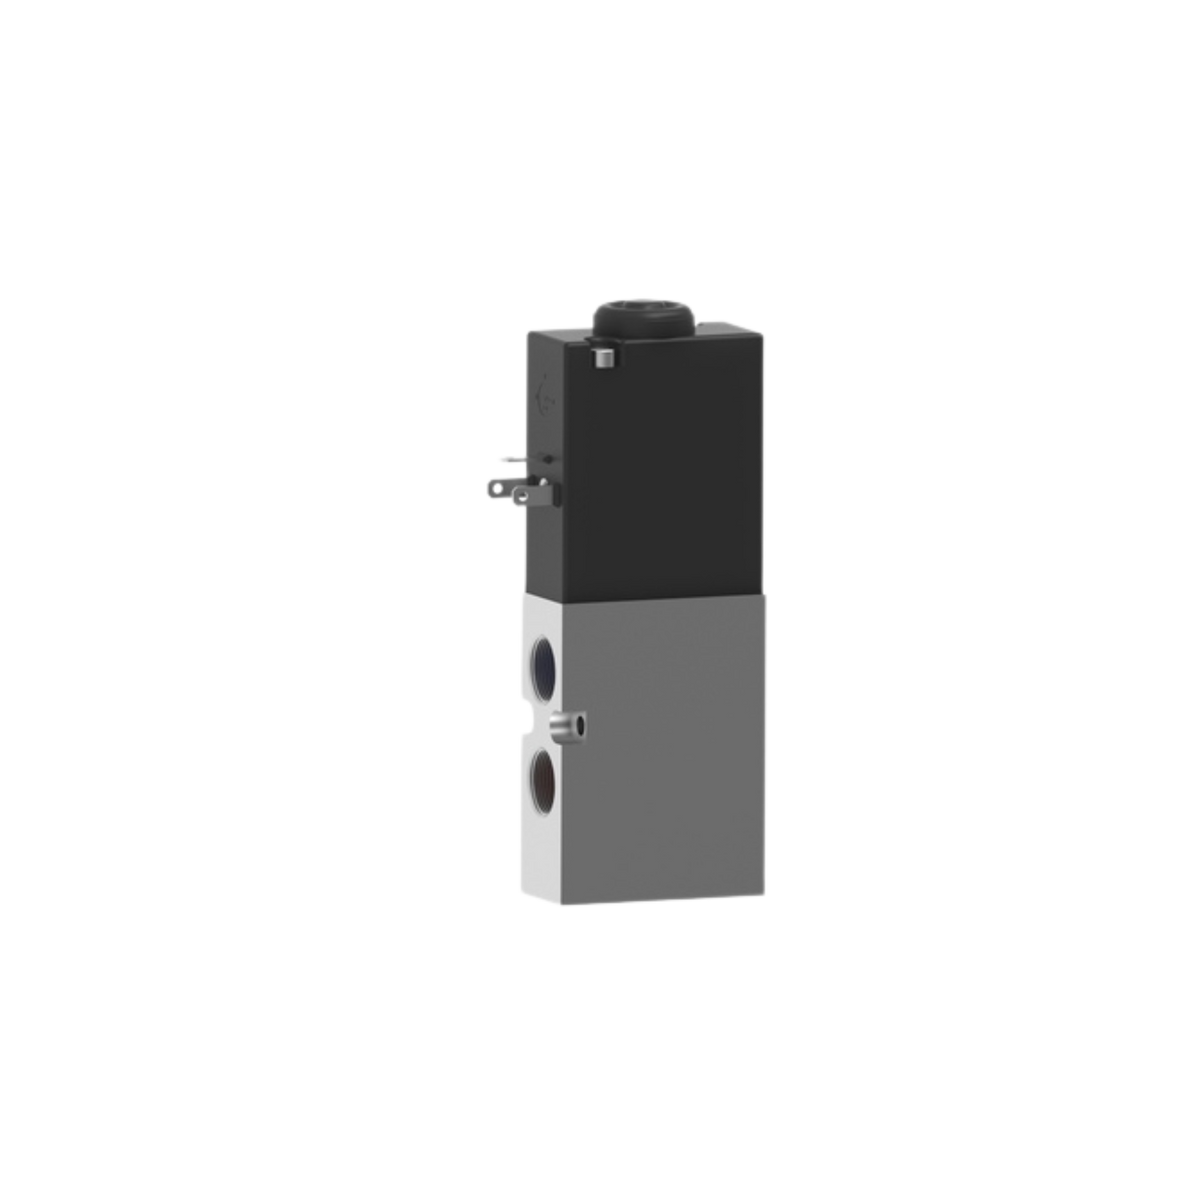 side view of an upright rectangular valve with an aluminum bottom half that has two ports on the left and a black top half that has an electrical plug on the left